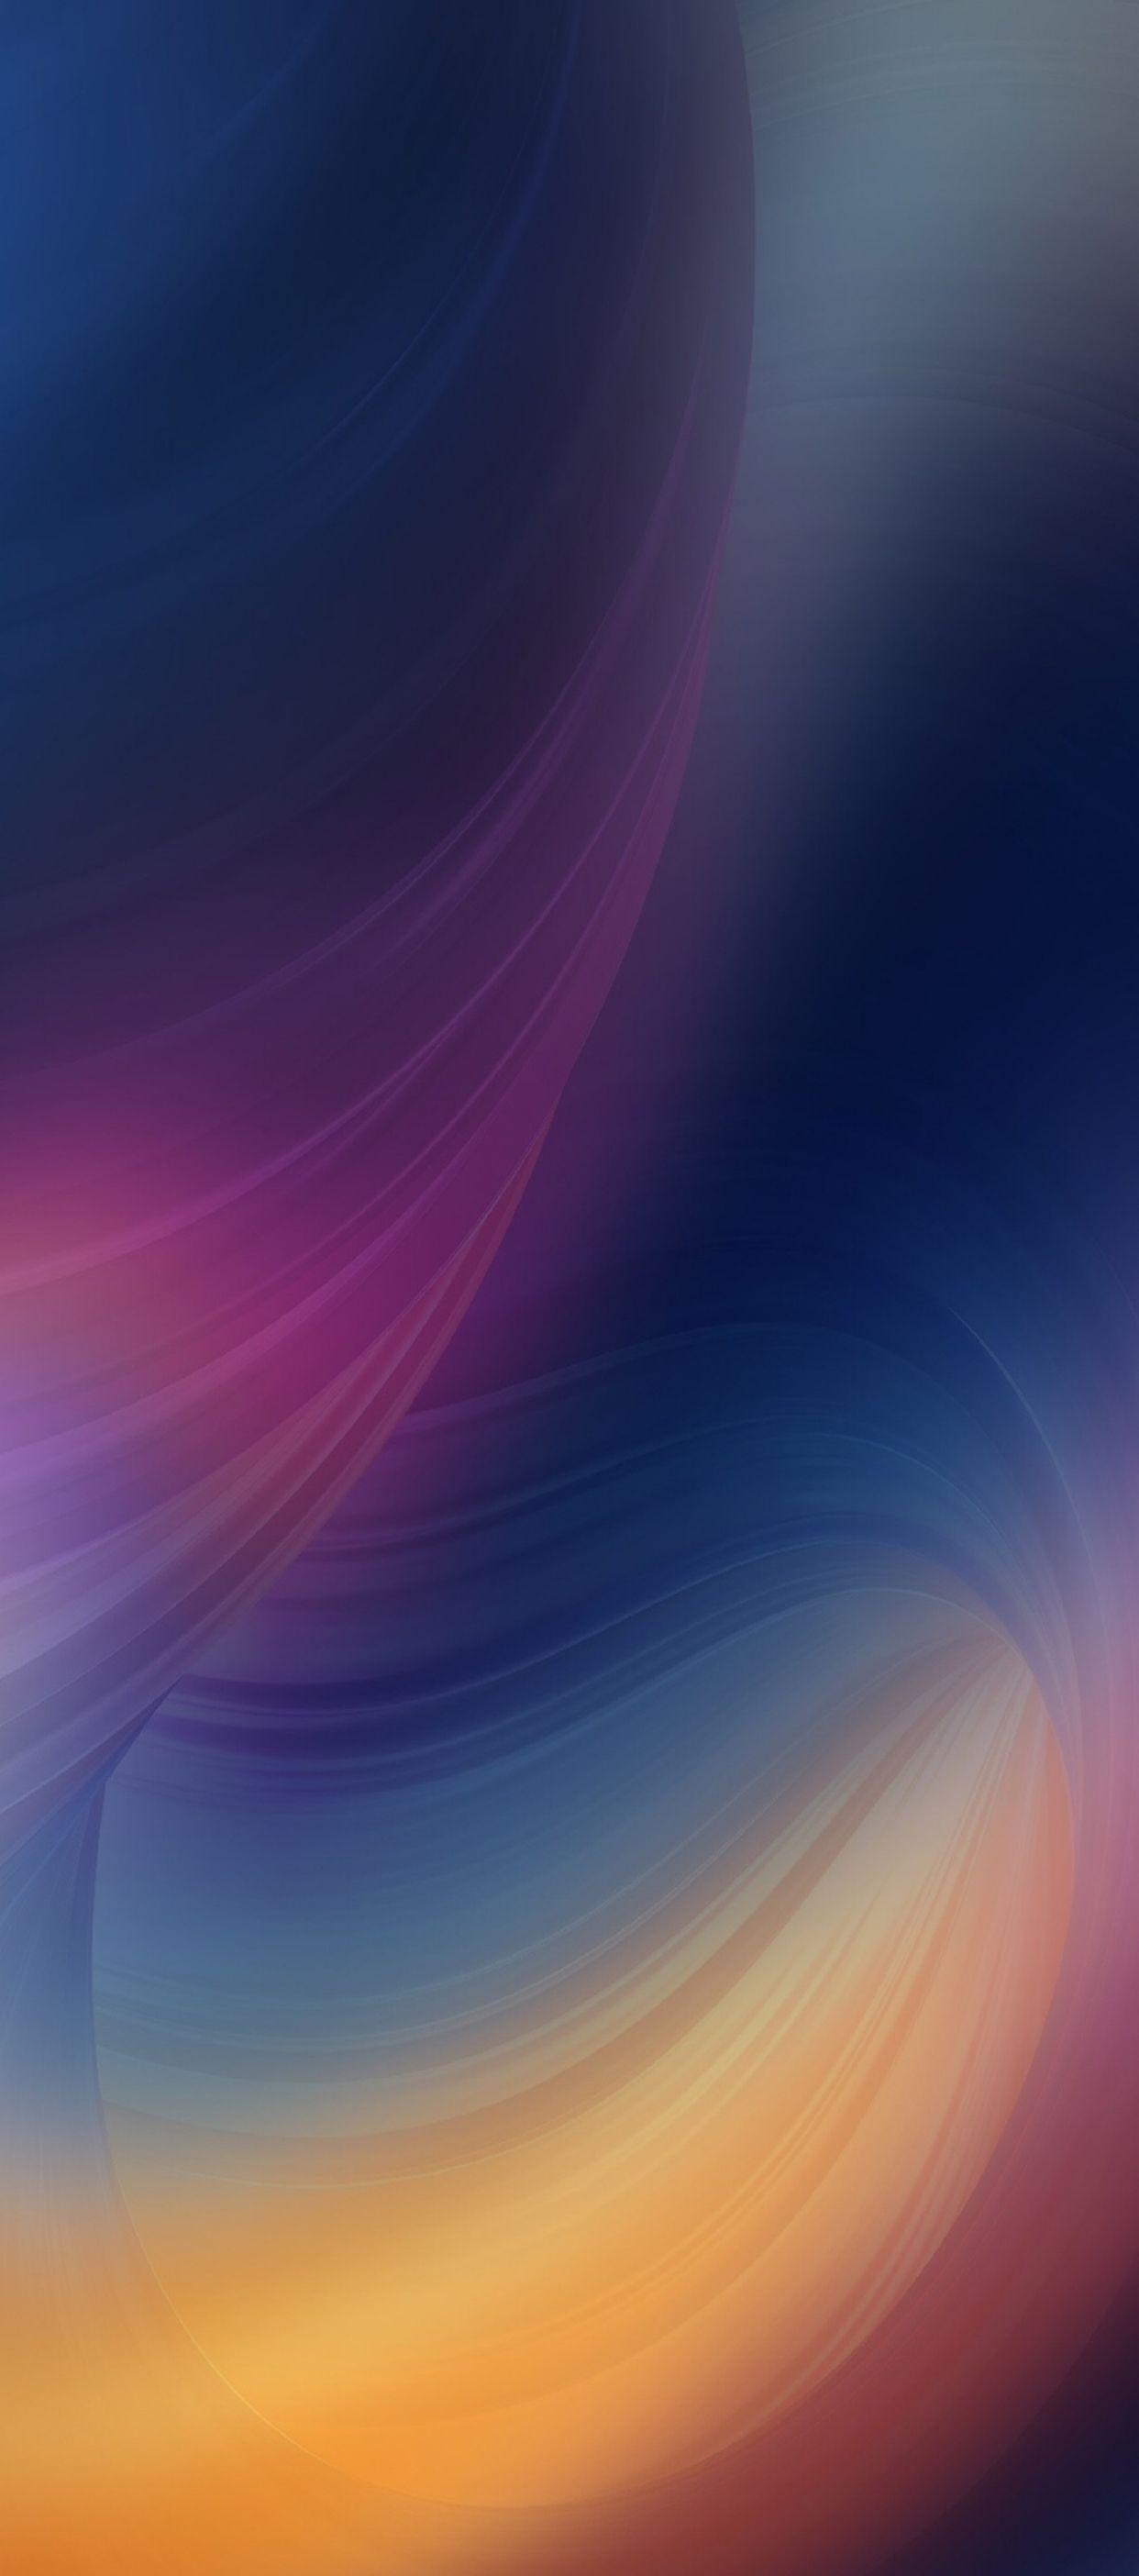 iOS iPhone X, purple, blue, clean, simple, abstract, apple